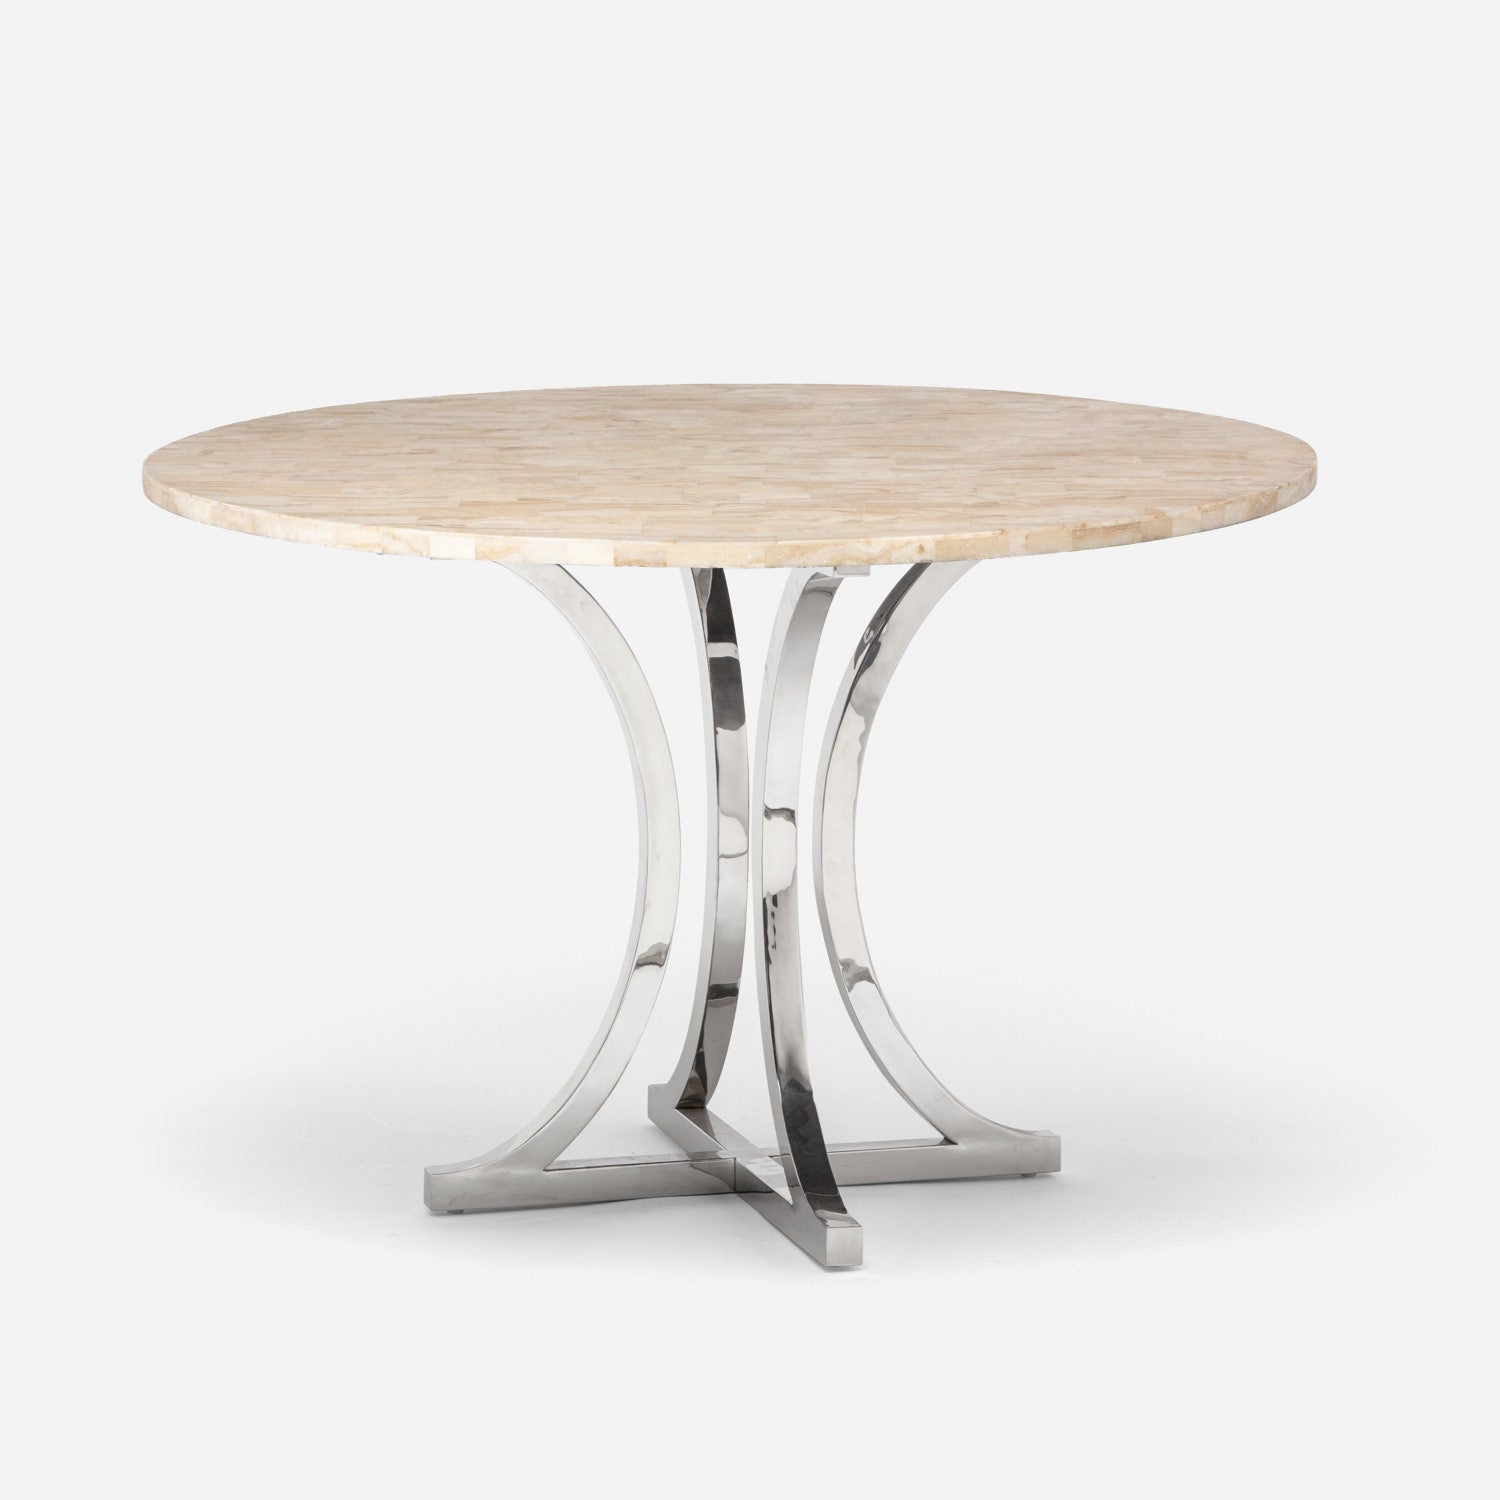 Made Goods Leighton 54" x 30" Polished Silver Steel Dinning Table With Round Beige Crystal Stone Table Top